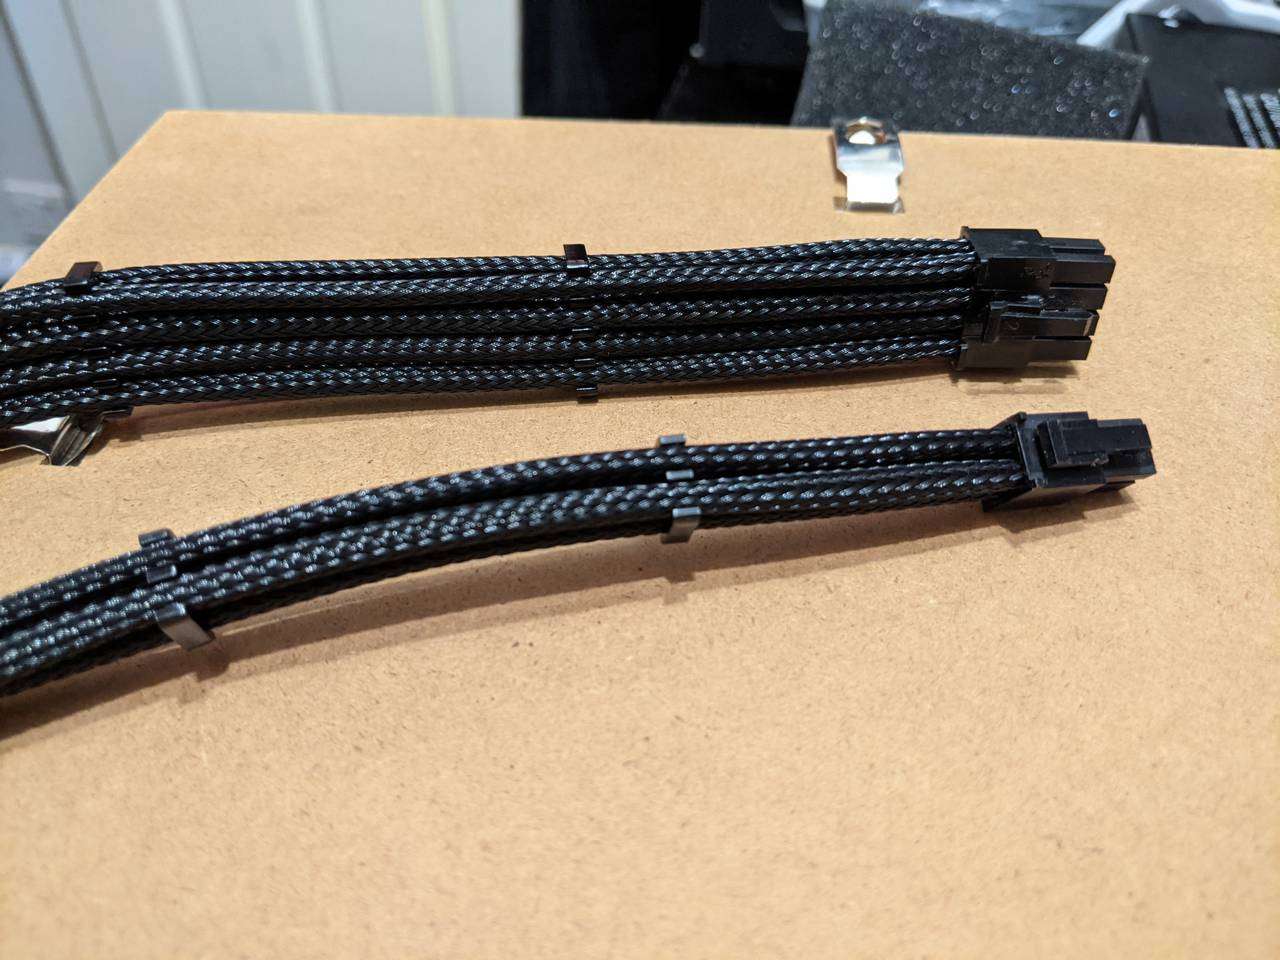 4-pin ATX12V and 8-pin EPS12V, resleeved with cable combs